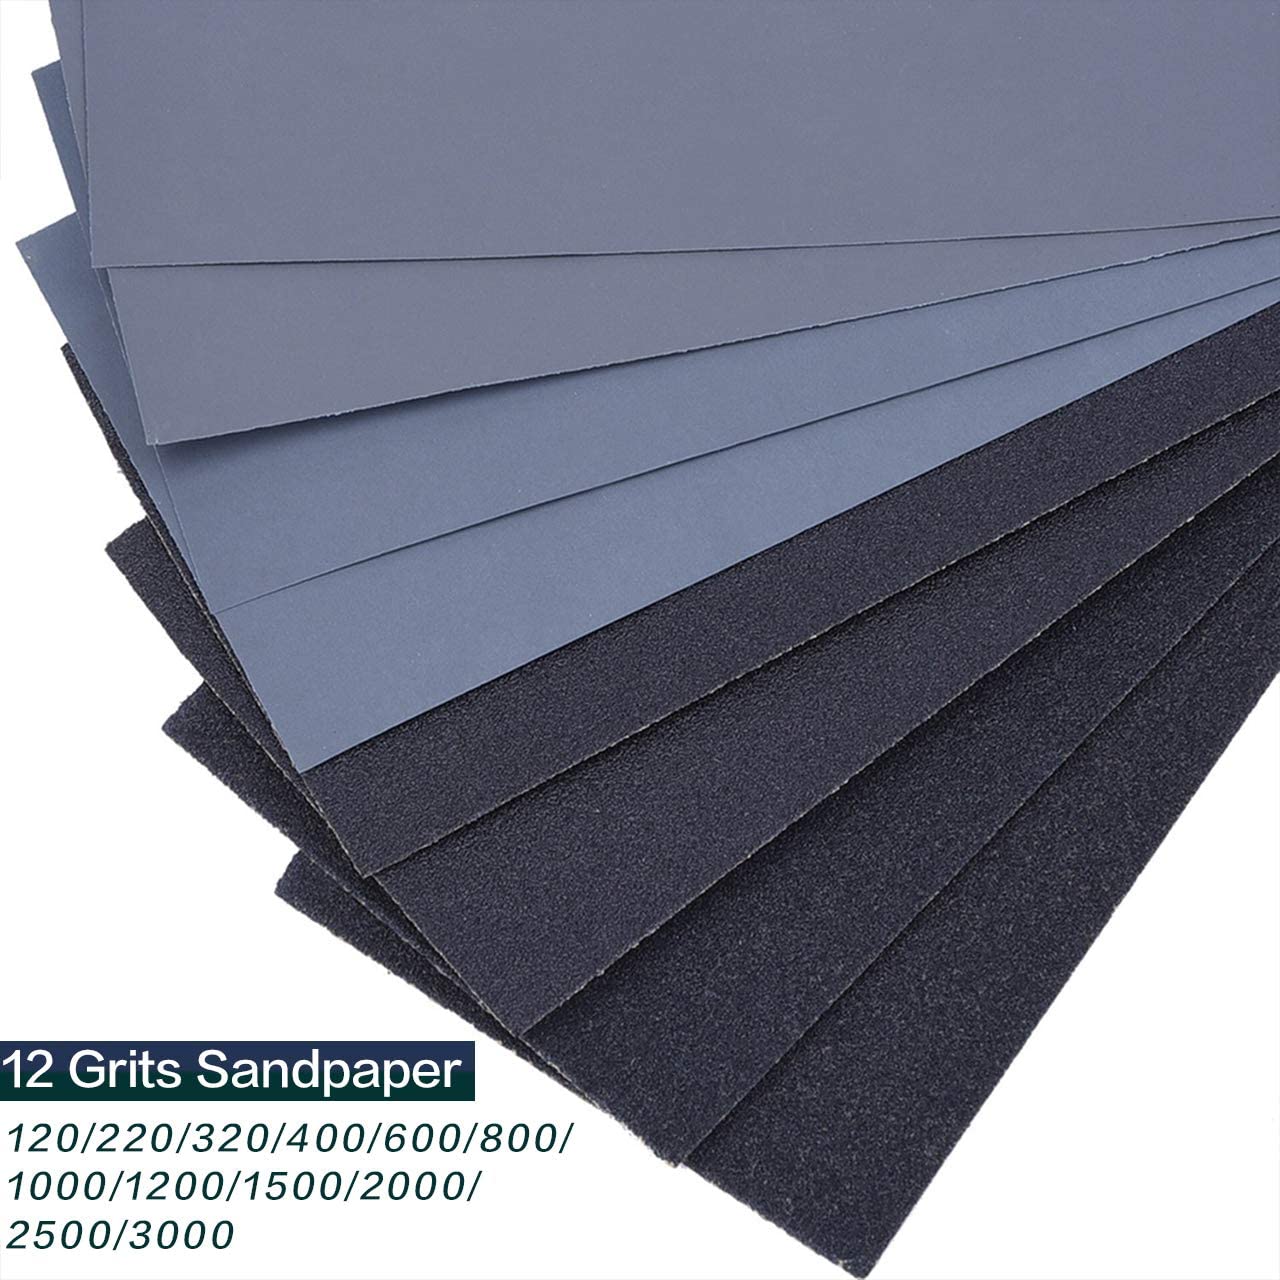 Wholesale 120 To 3000 Assorted Grit Sandpaper for Wood Furniture Finishing, Metal Sanding and Automotive Polishing, Dry or Wet Sanding, 9 x 3.6 Inch